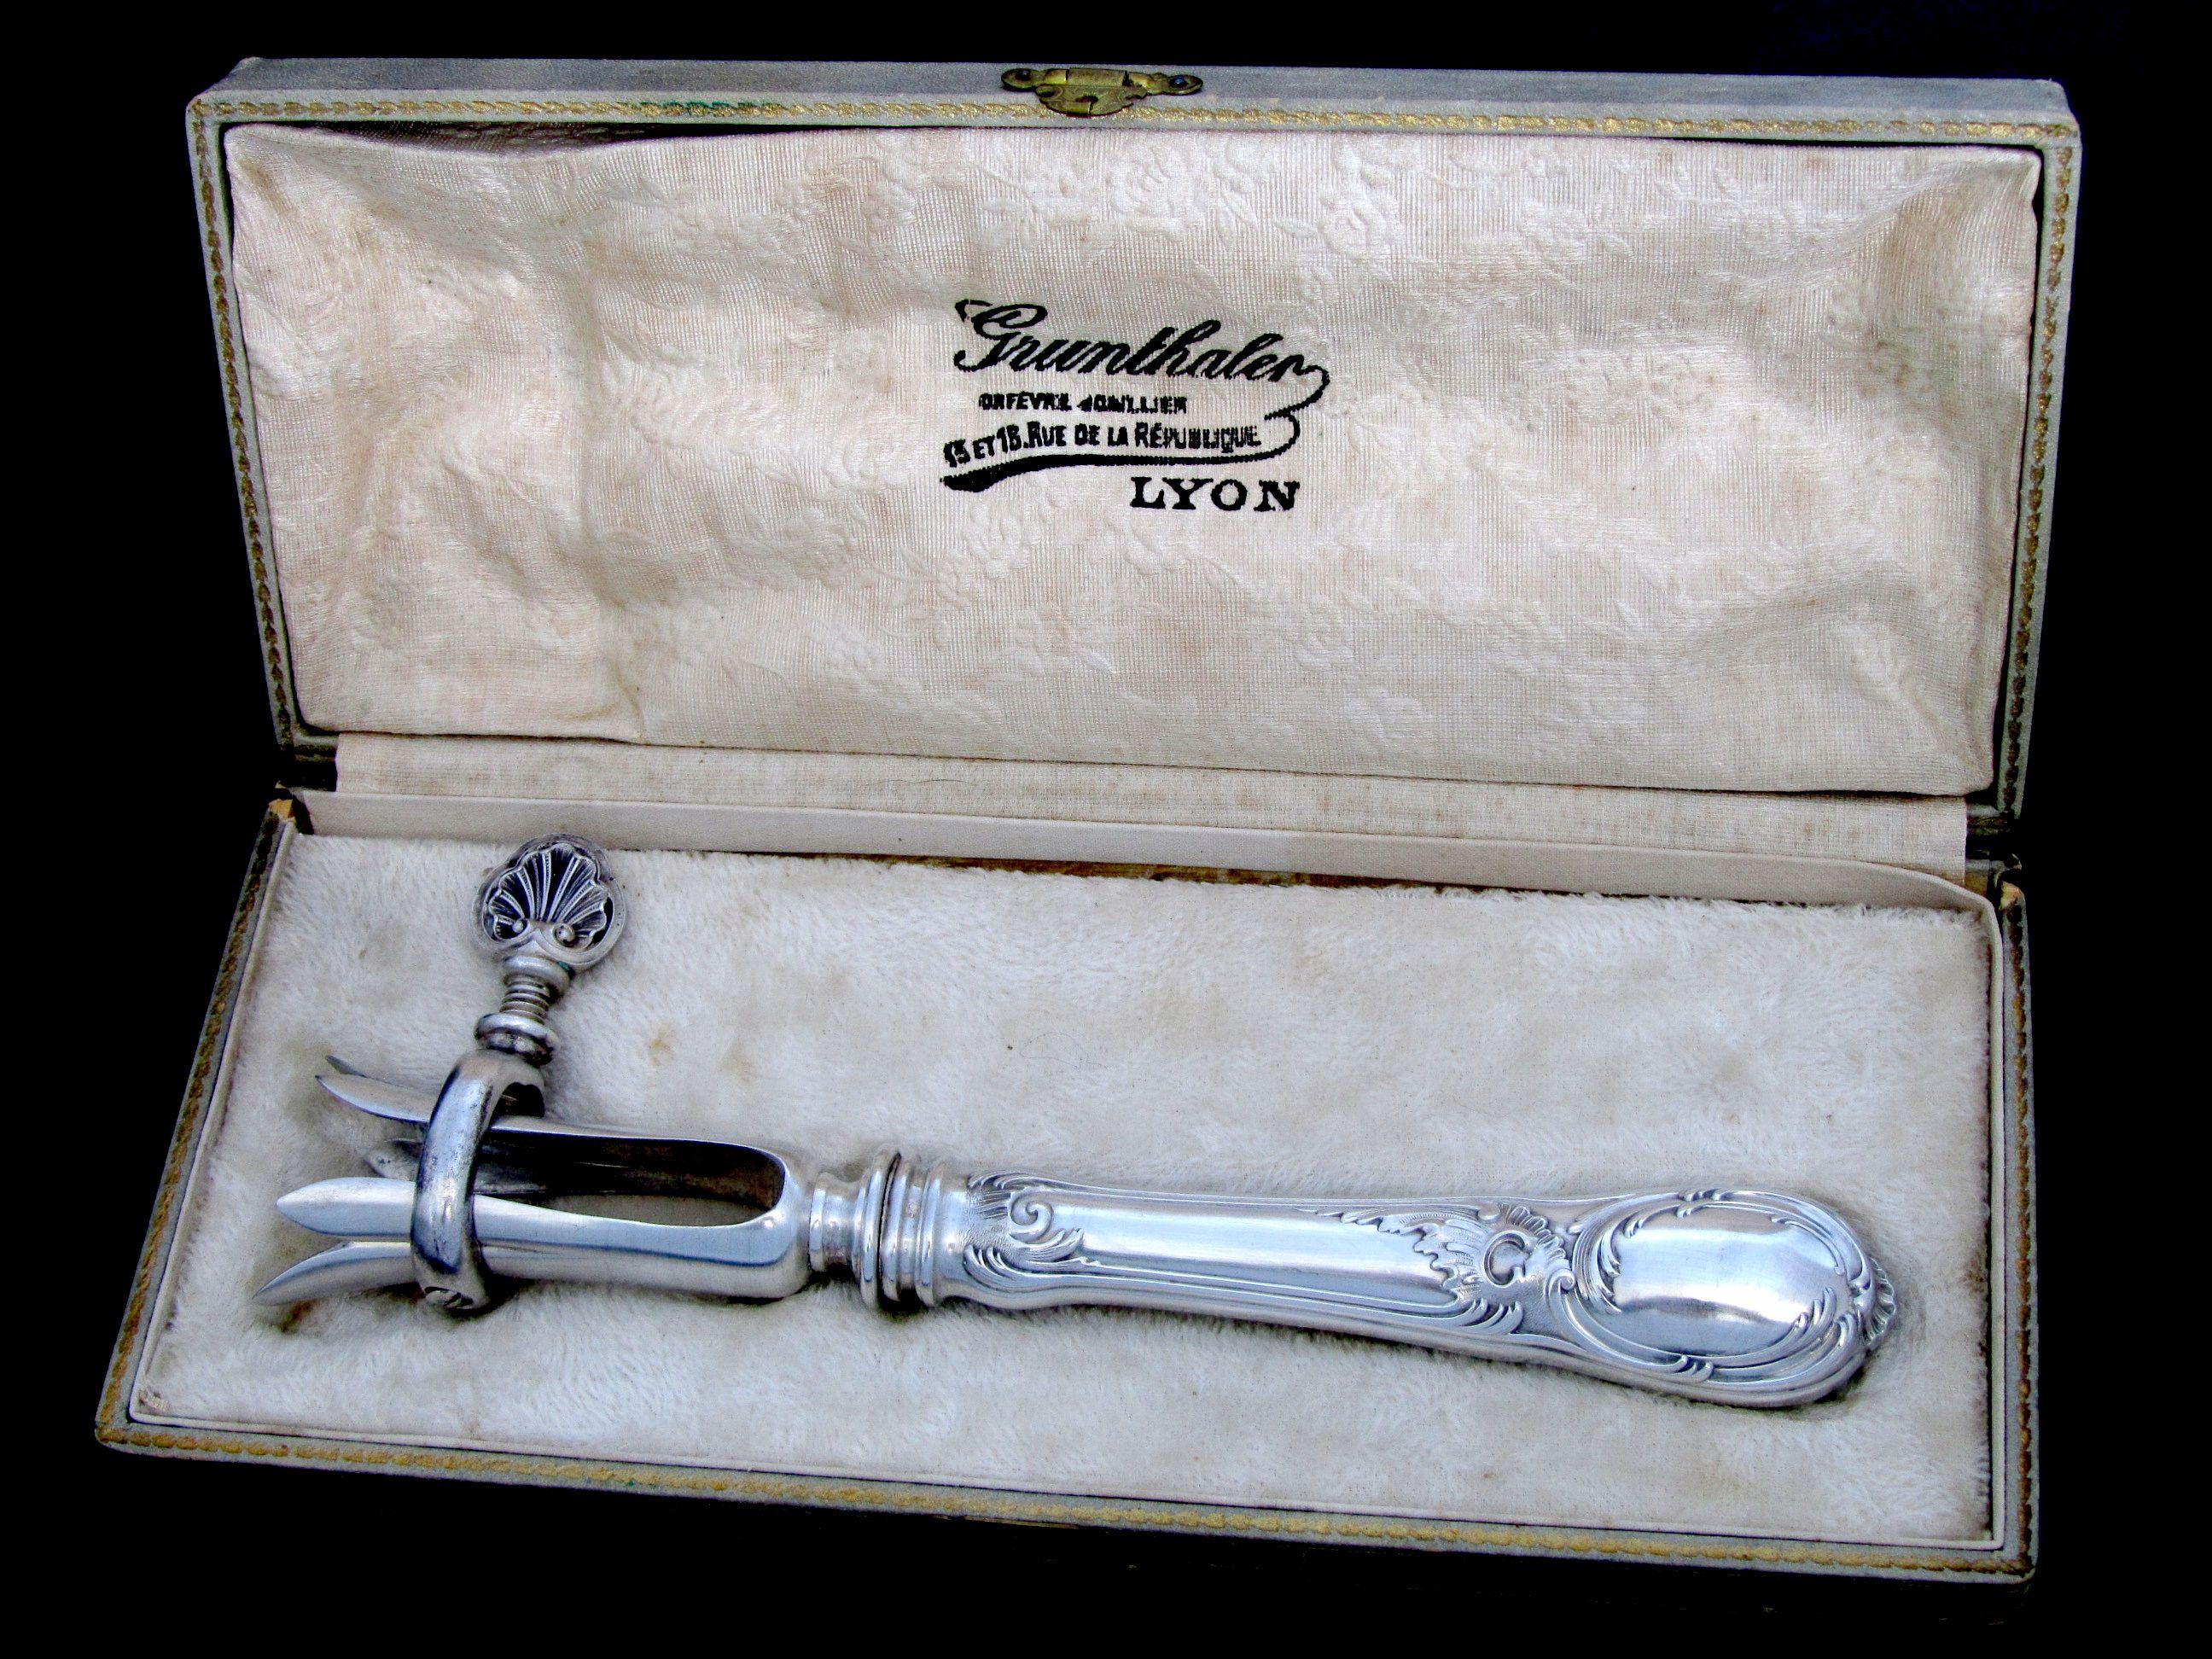 Head of Minerve 1st titre on the handle for 950/1000 French Sterling Silver guarantee.

A gorgeous bone holder with silver plate grip and handle. A piece of high quality presented in its original box. No monograms.

One the most prestigious French